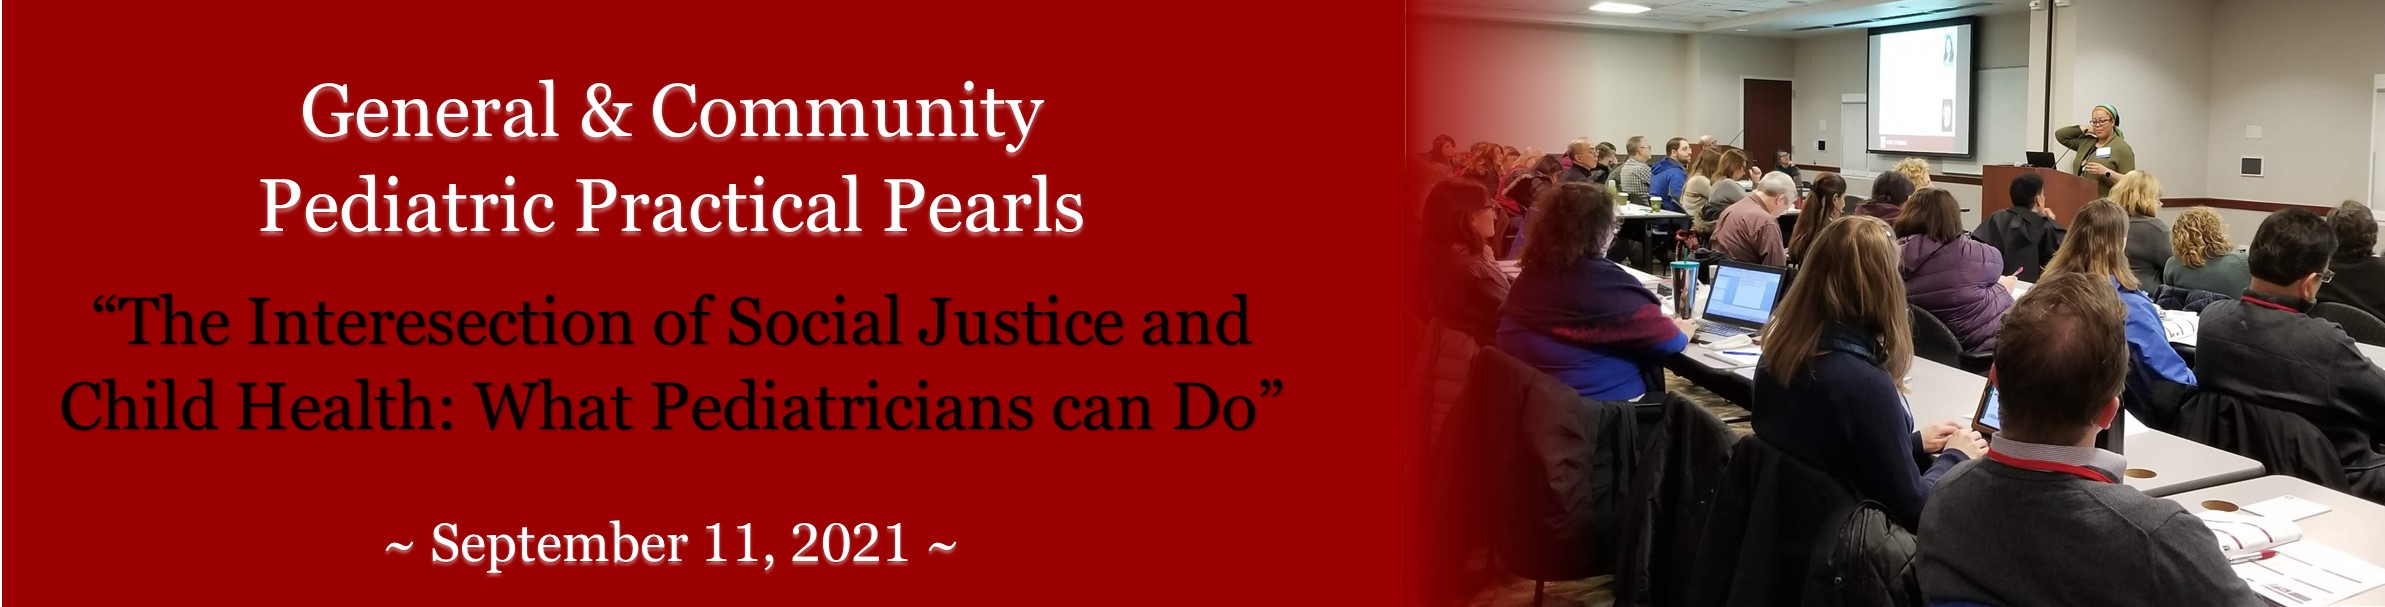 September 2021 Pediatric Practical Pearls: The Intersection of Social Justice and Child Health: What Pediatricians Can Do? Banner